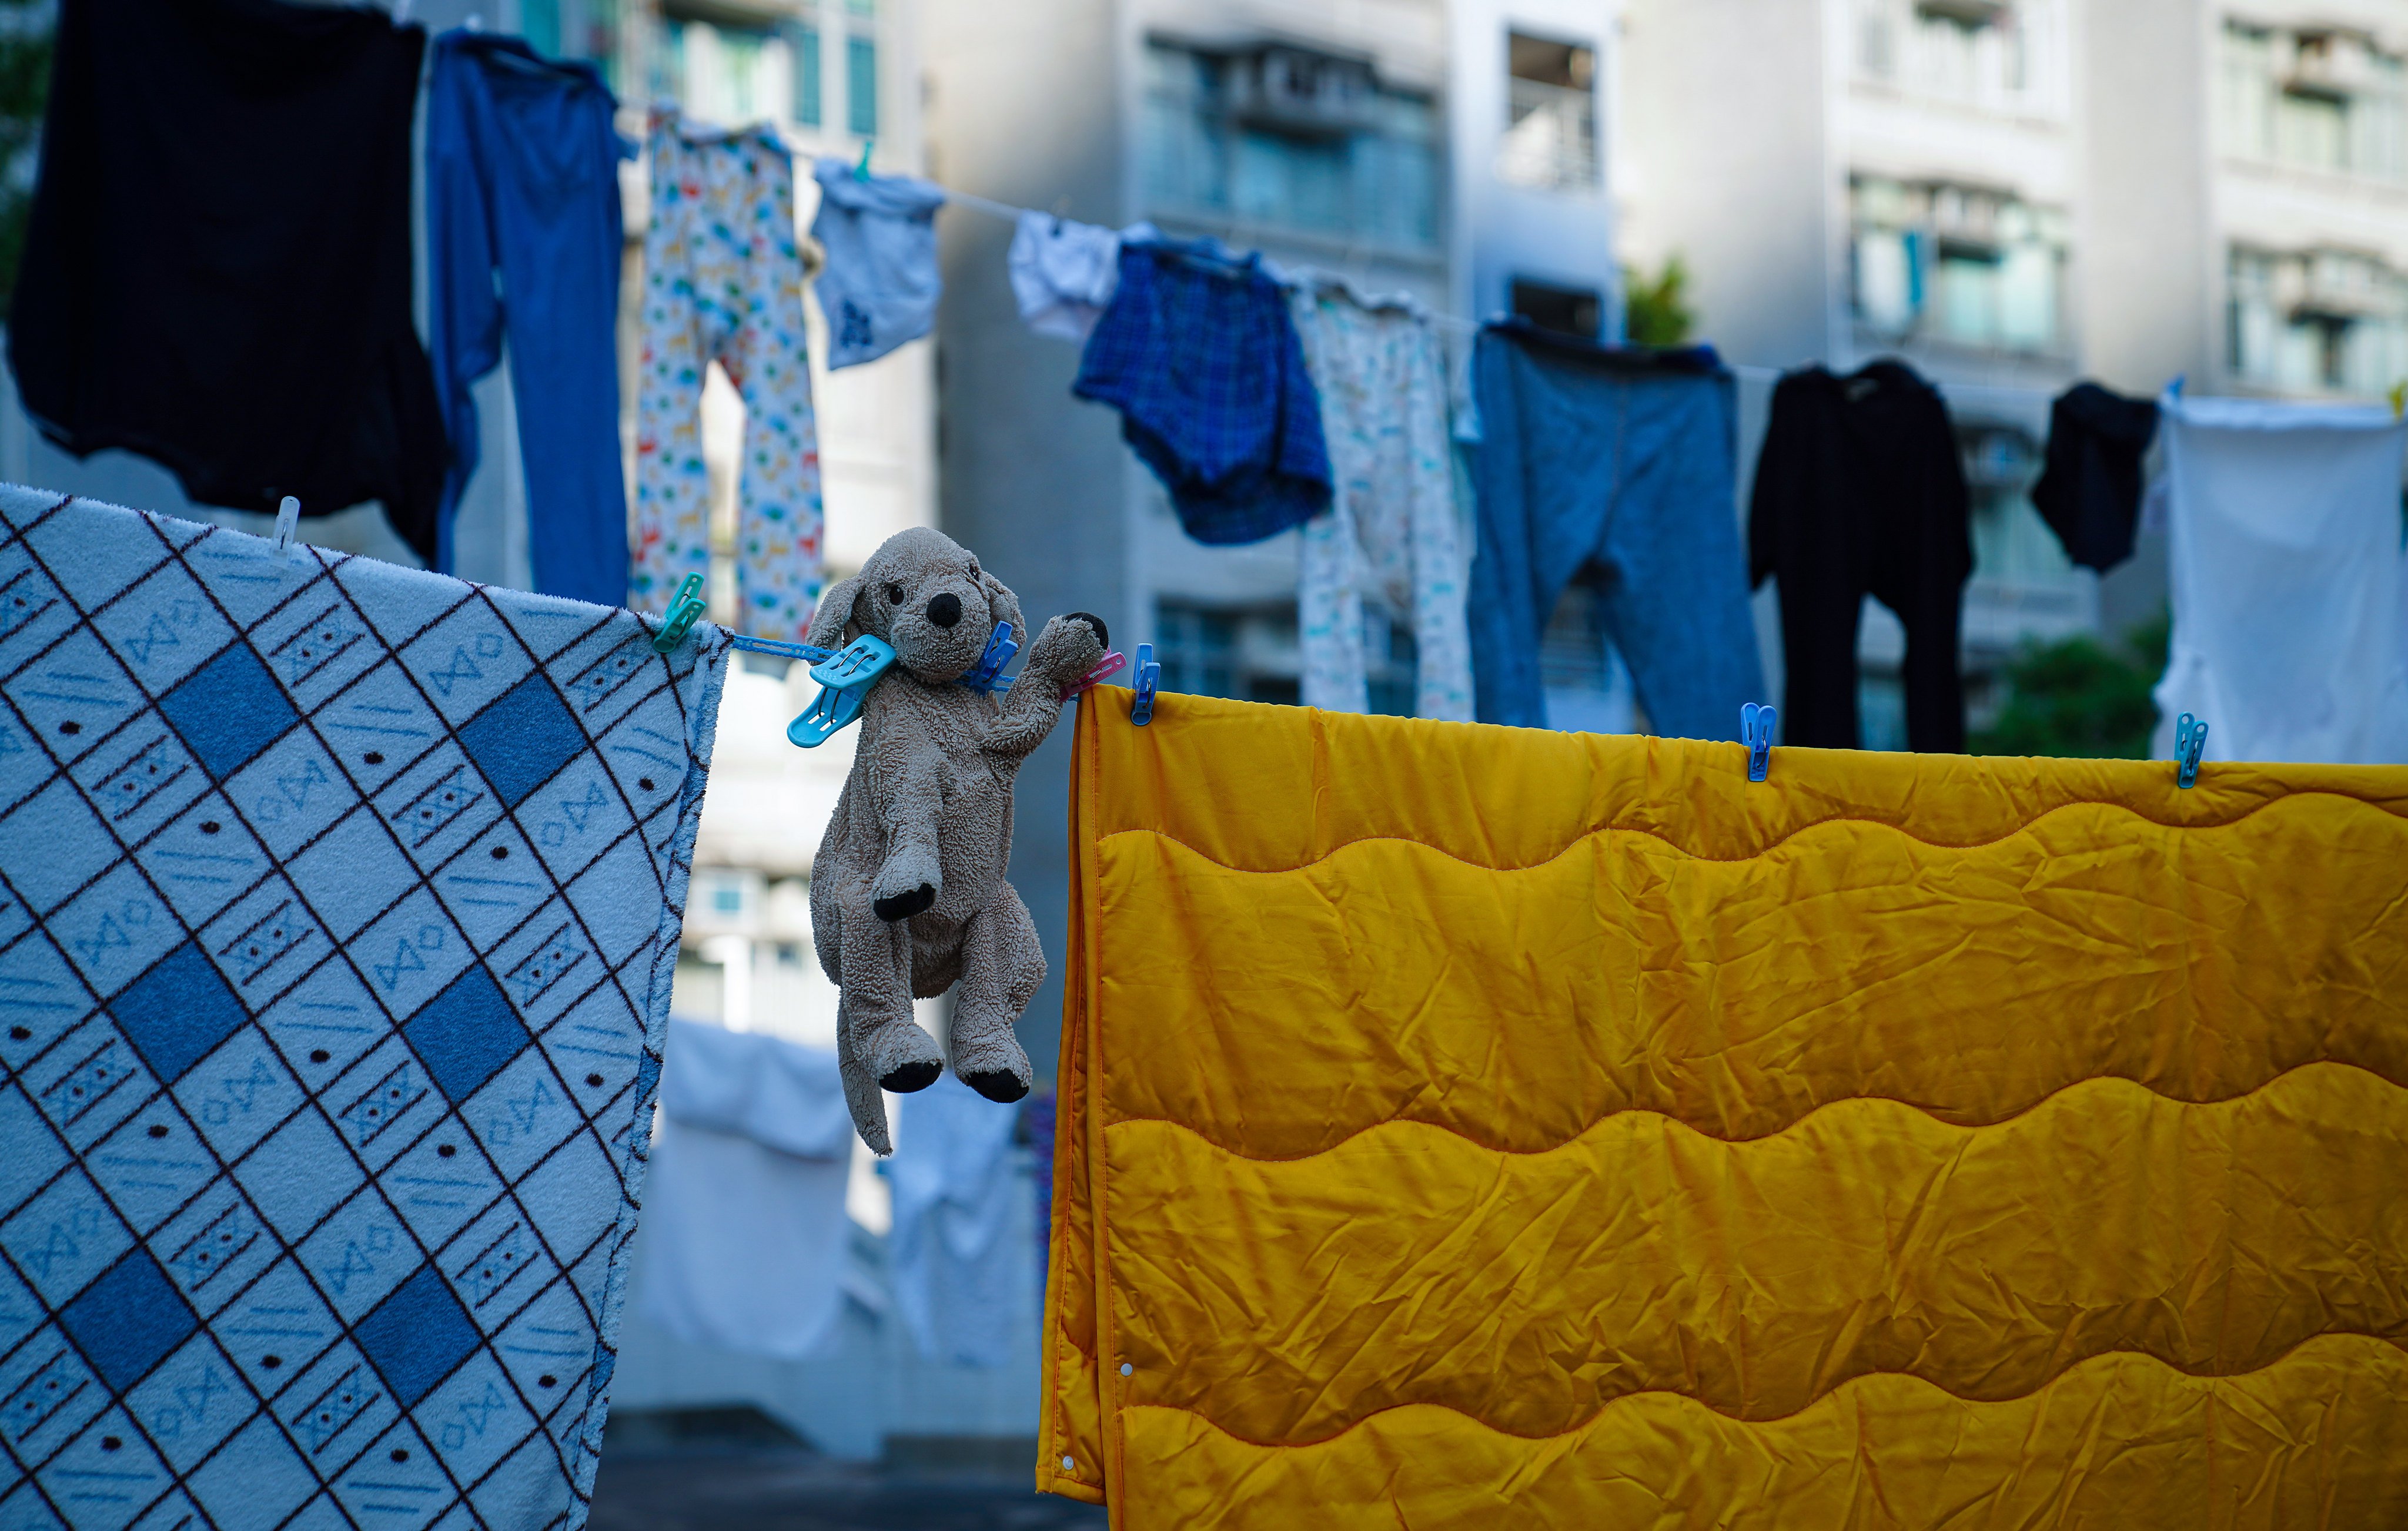 Water bills currently cost laundry service operators up to HK$200,000 a month. Photo: Sam Tsang